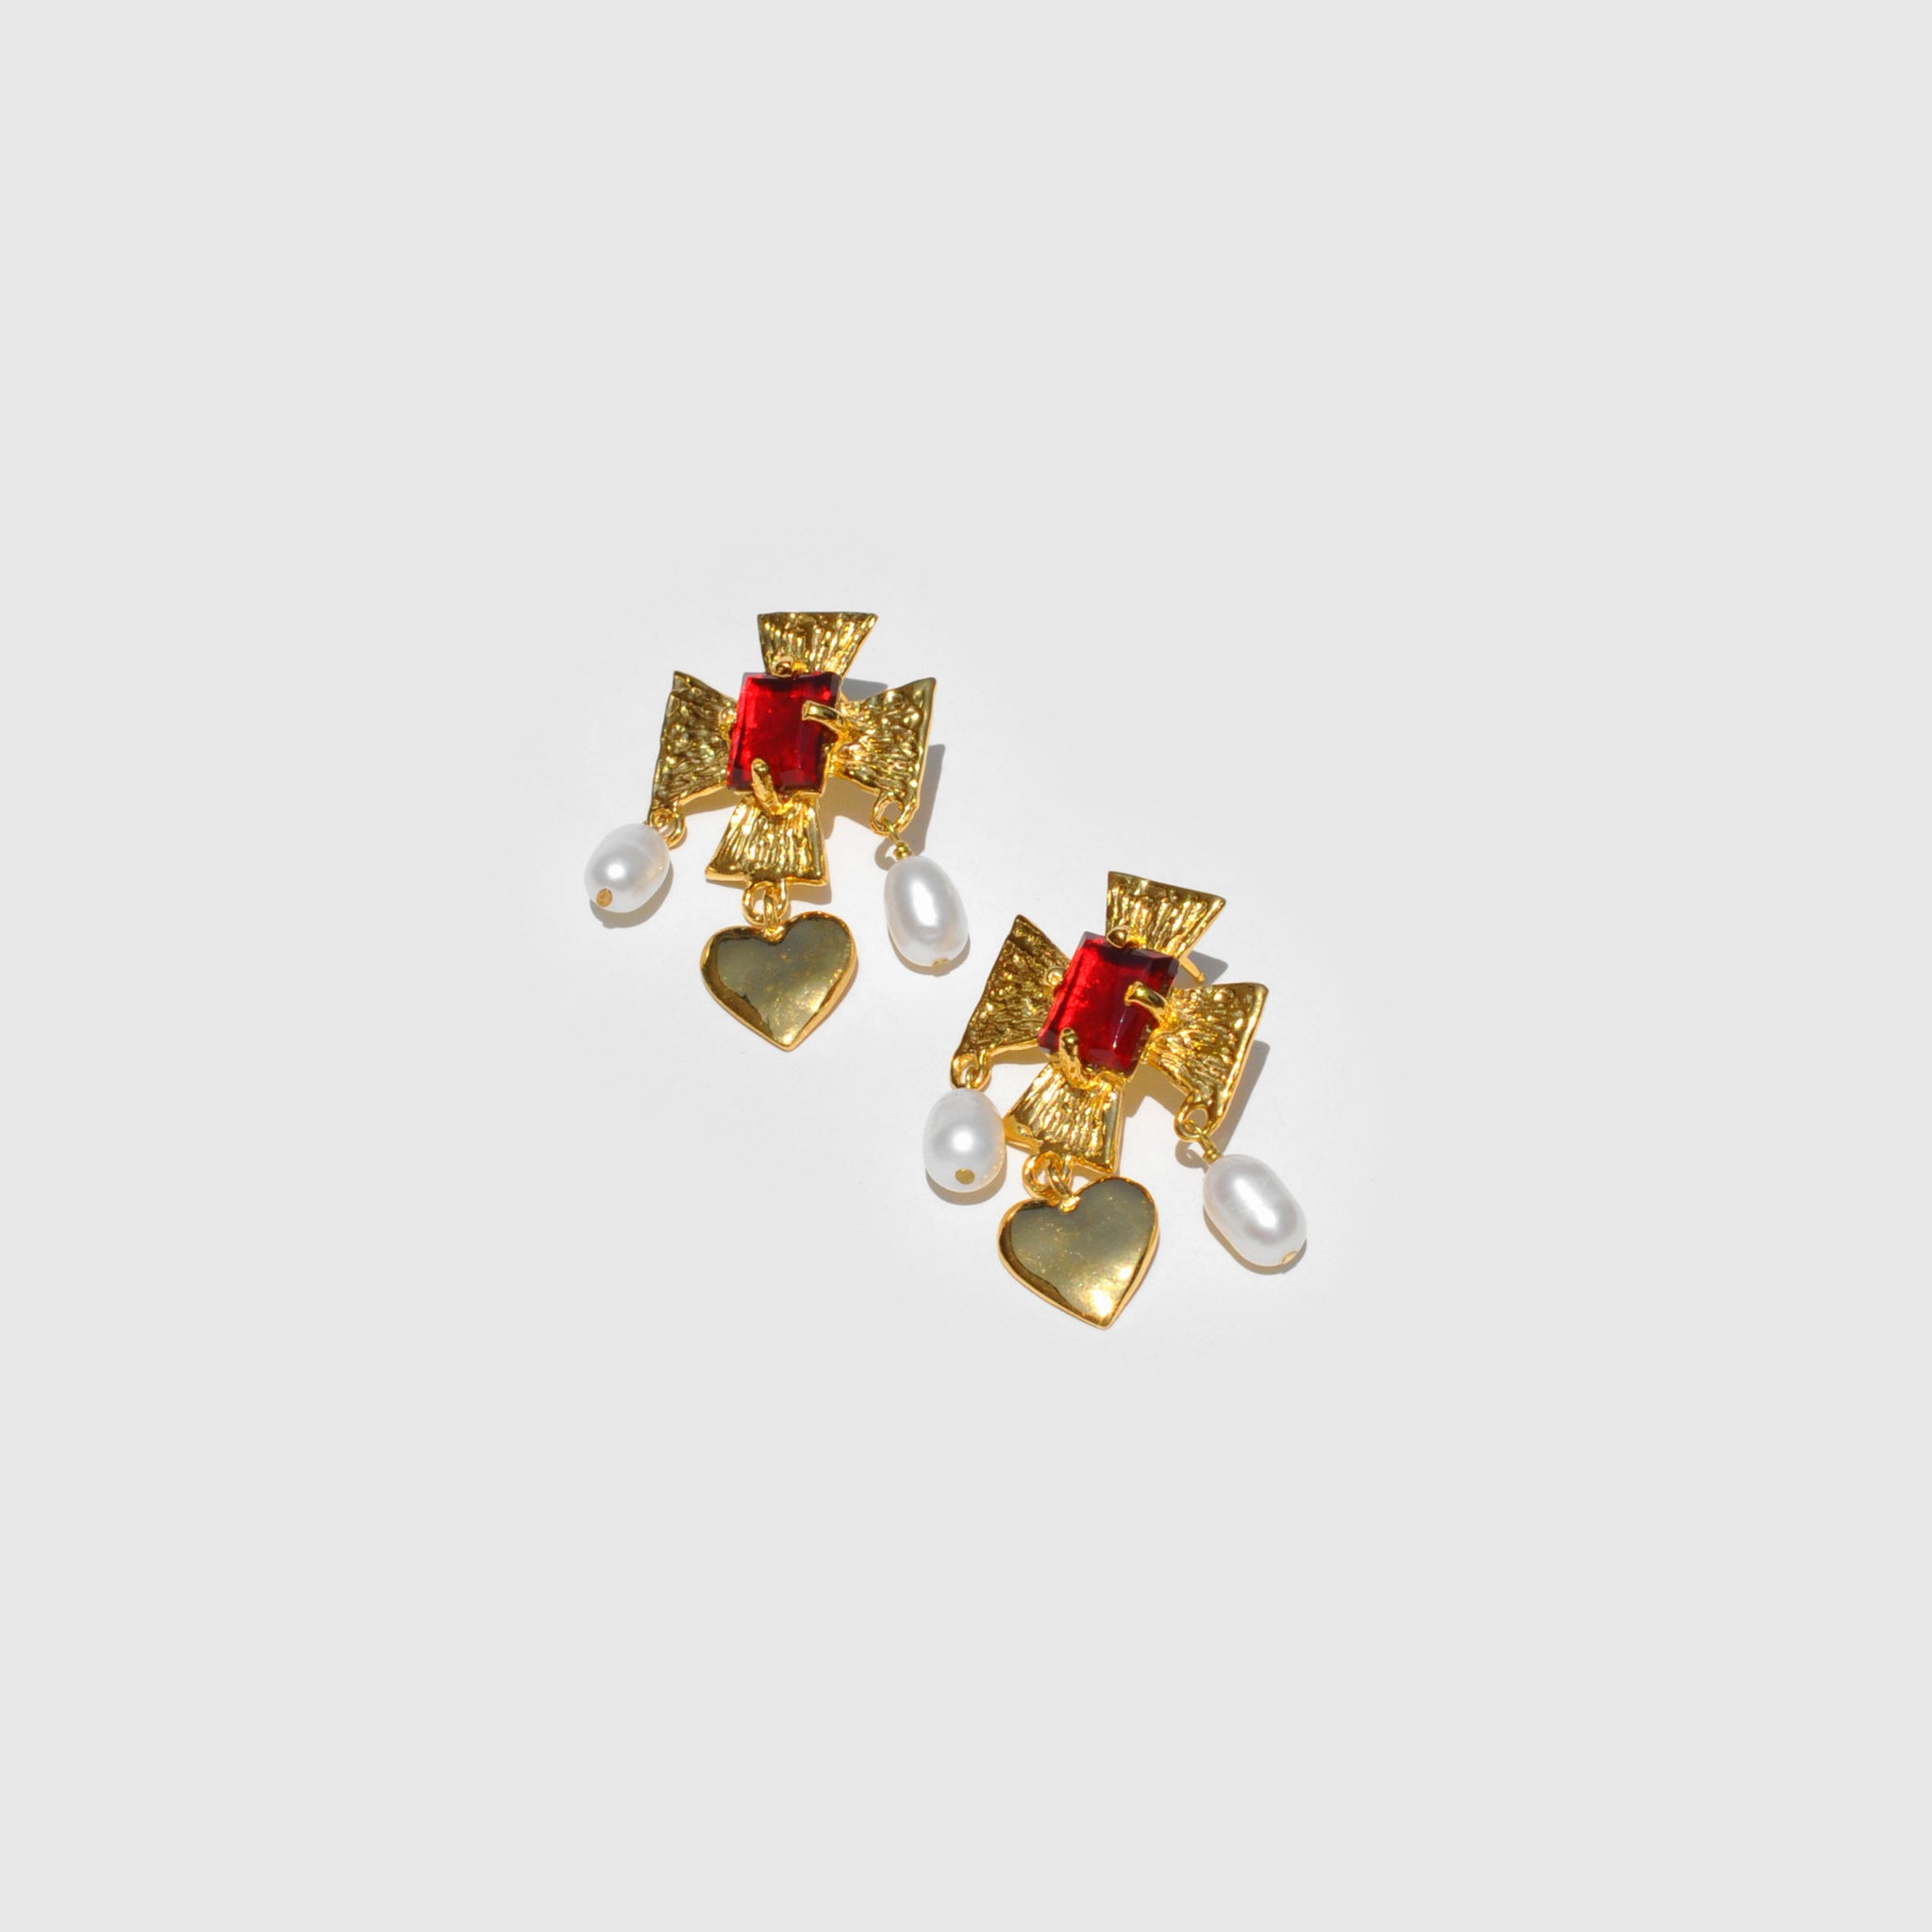 Photograph of the Mondo Mondo Cardinal Earrings in Ruby and gold.